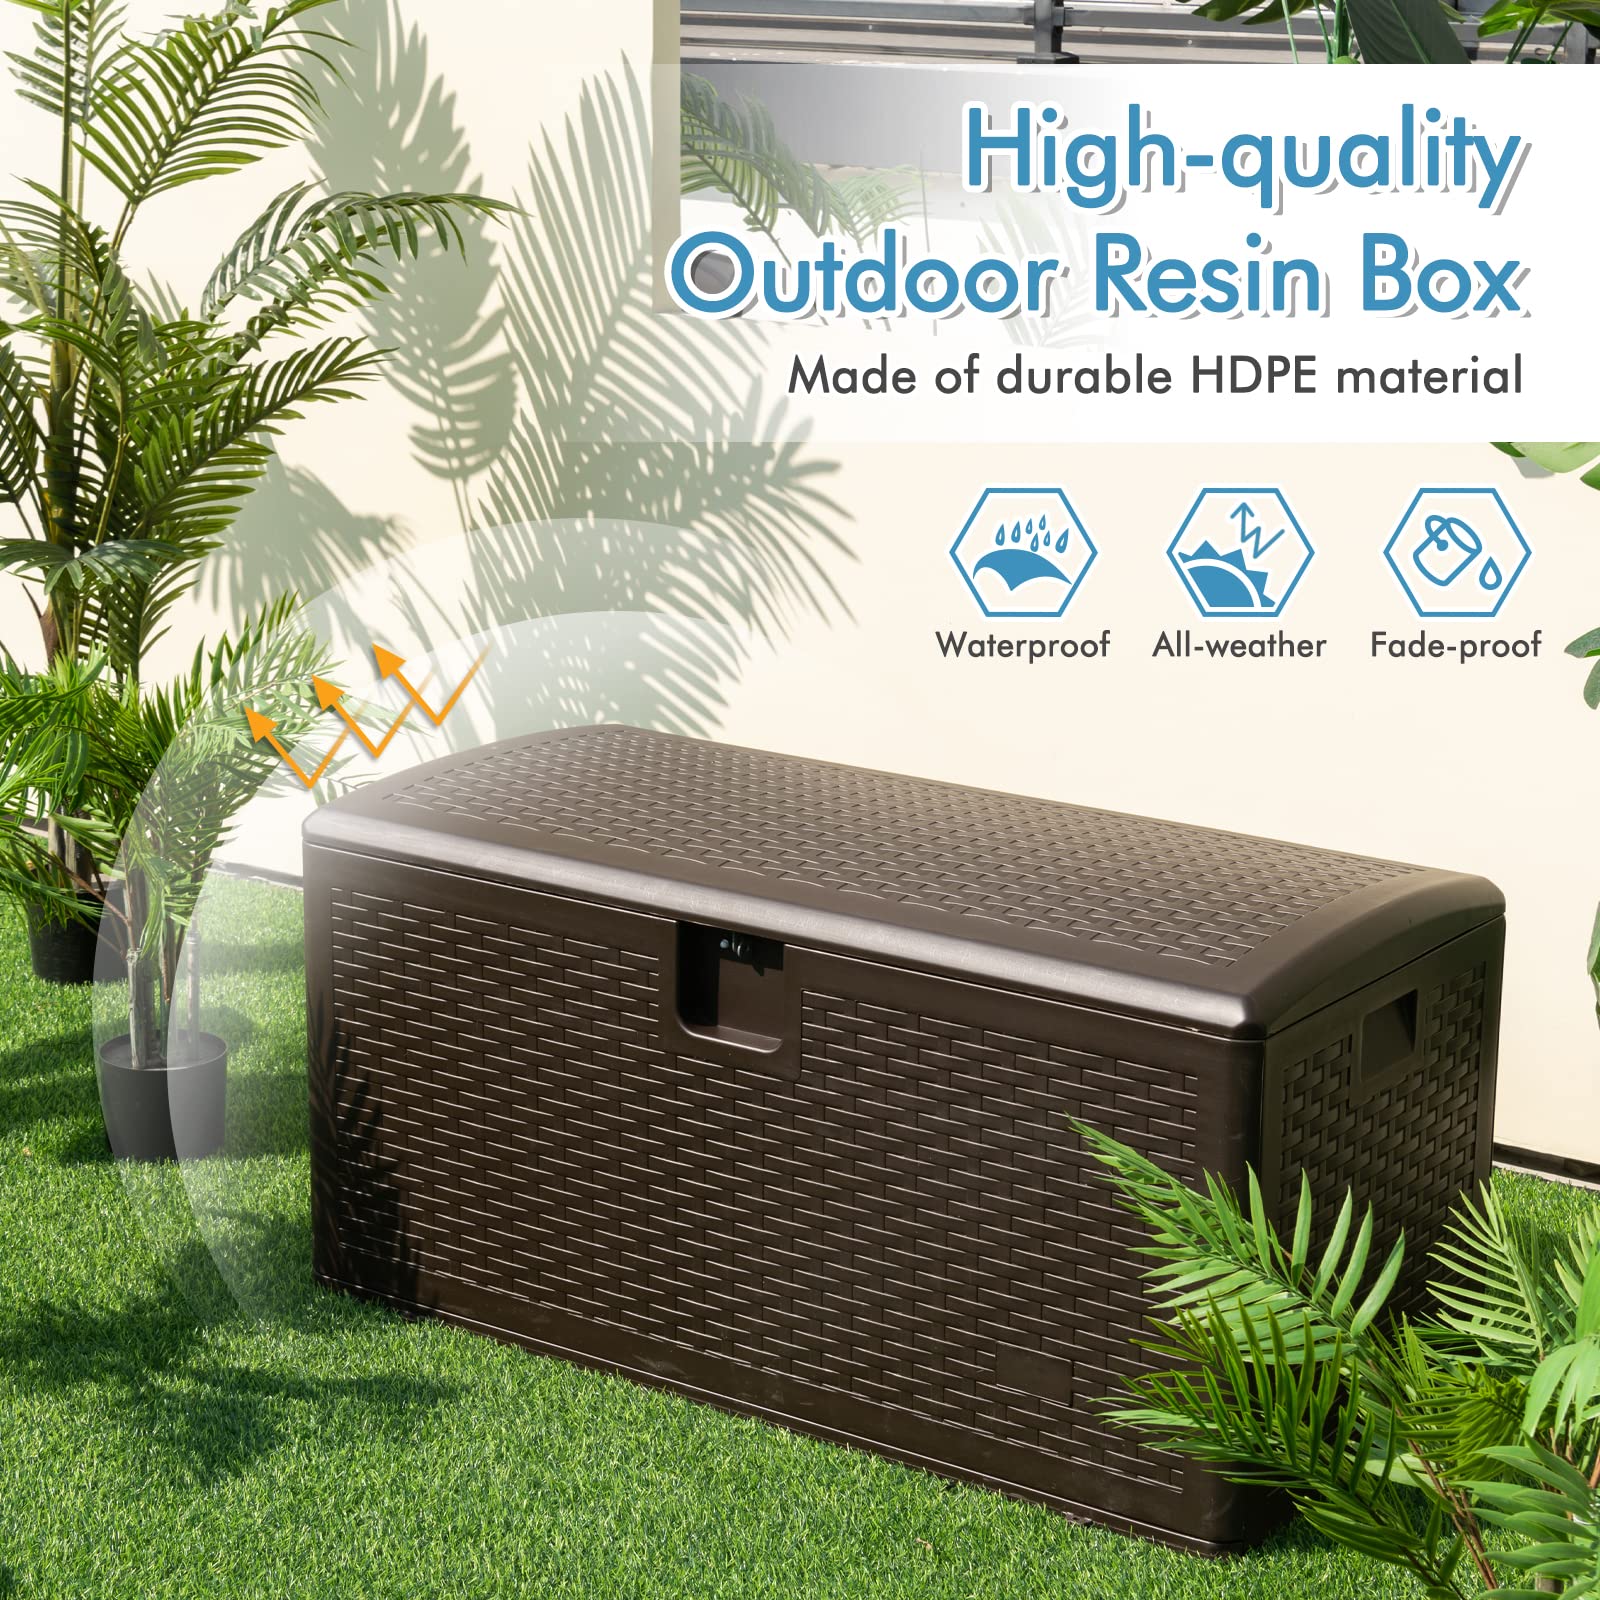 Giantex Patio Deck Box - Outdoor Storage Bin with Flip Lid, Lock Hole, Weather-resistant Package Delivery Boxes for Outside